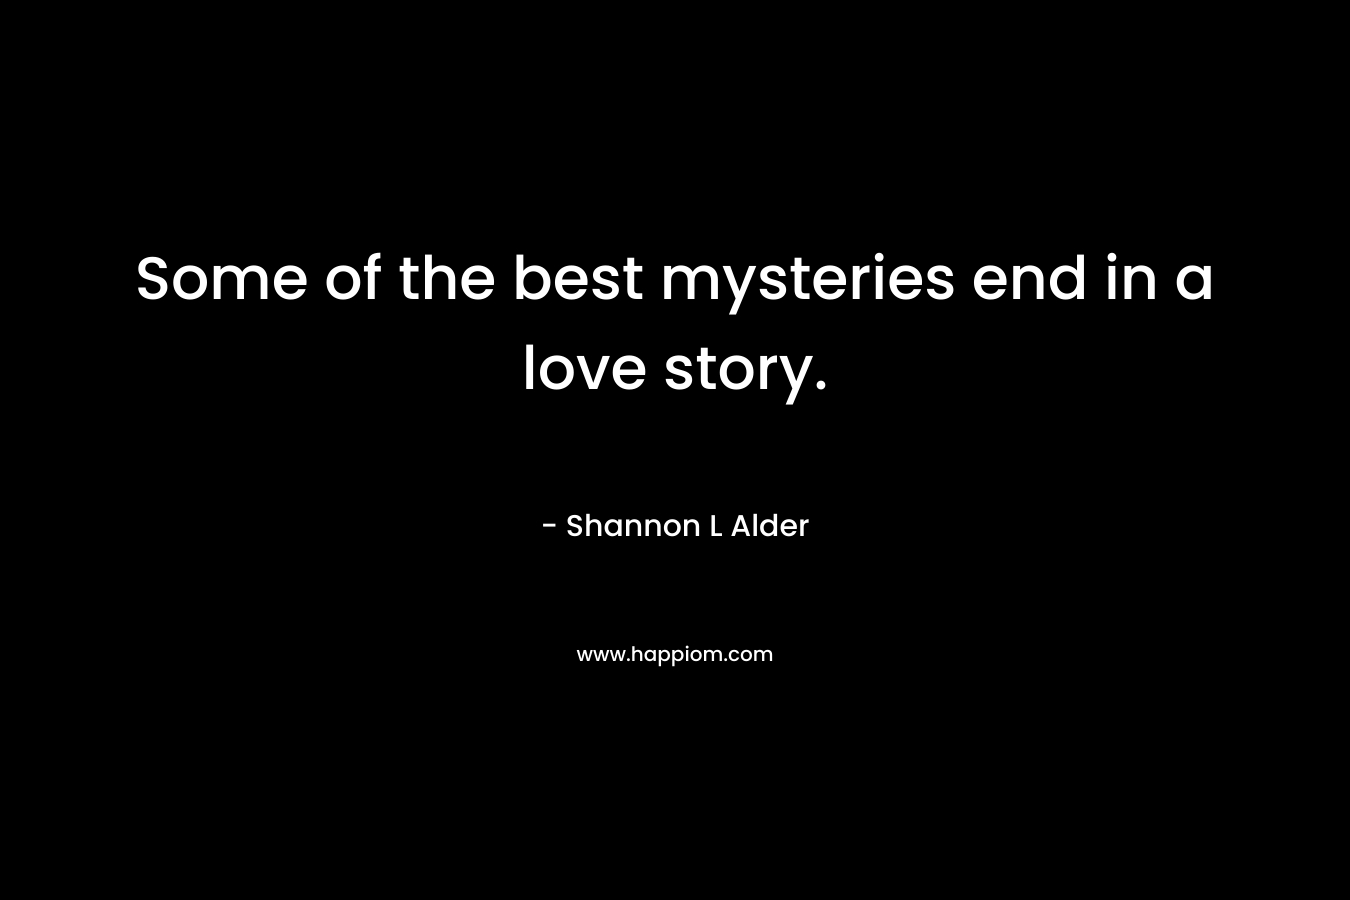 Some of the best mysteries end in a love story.